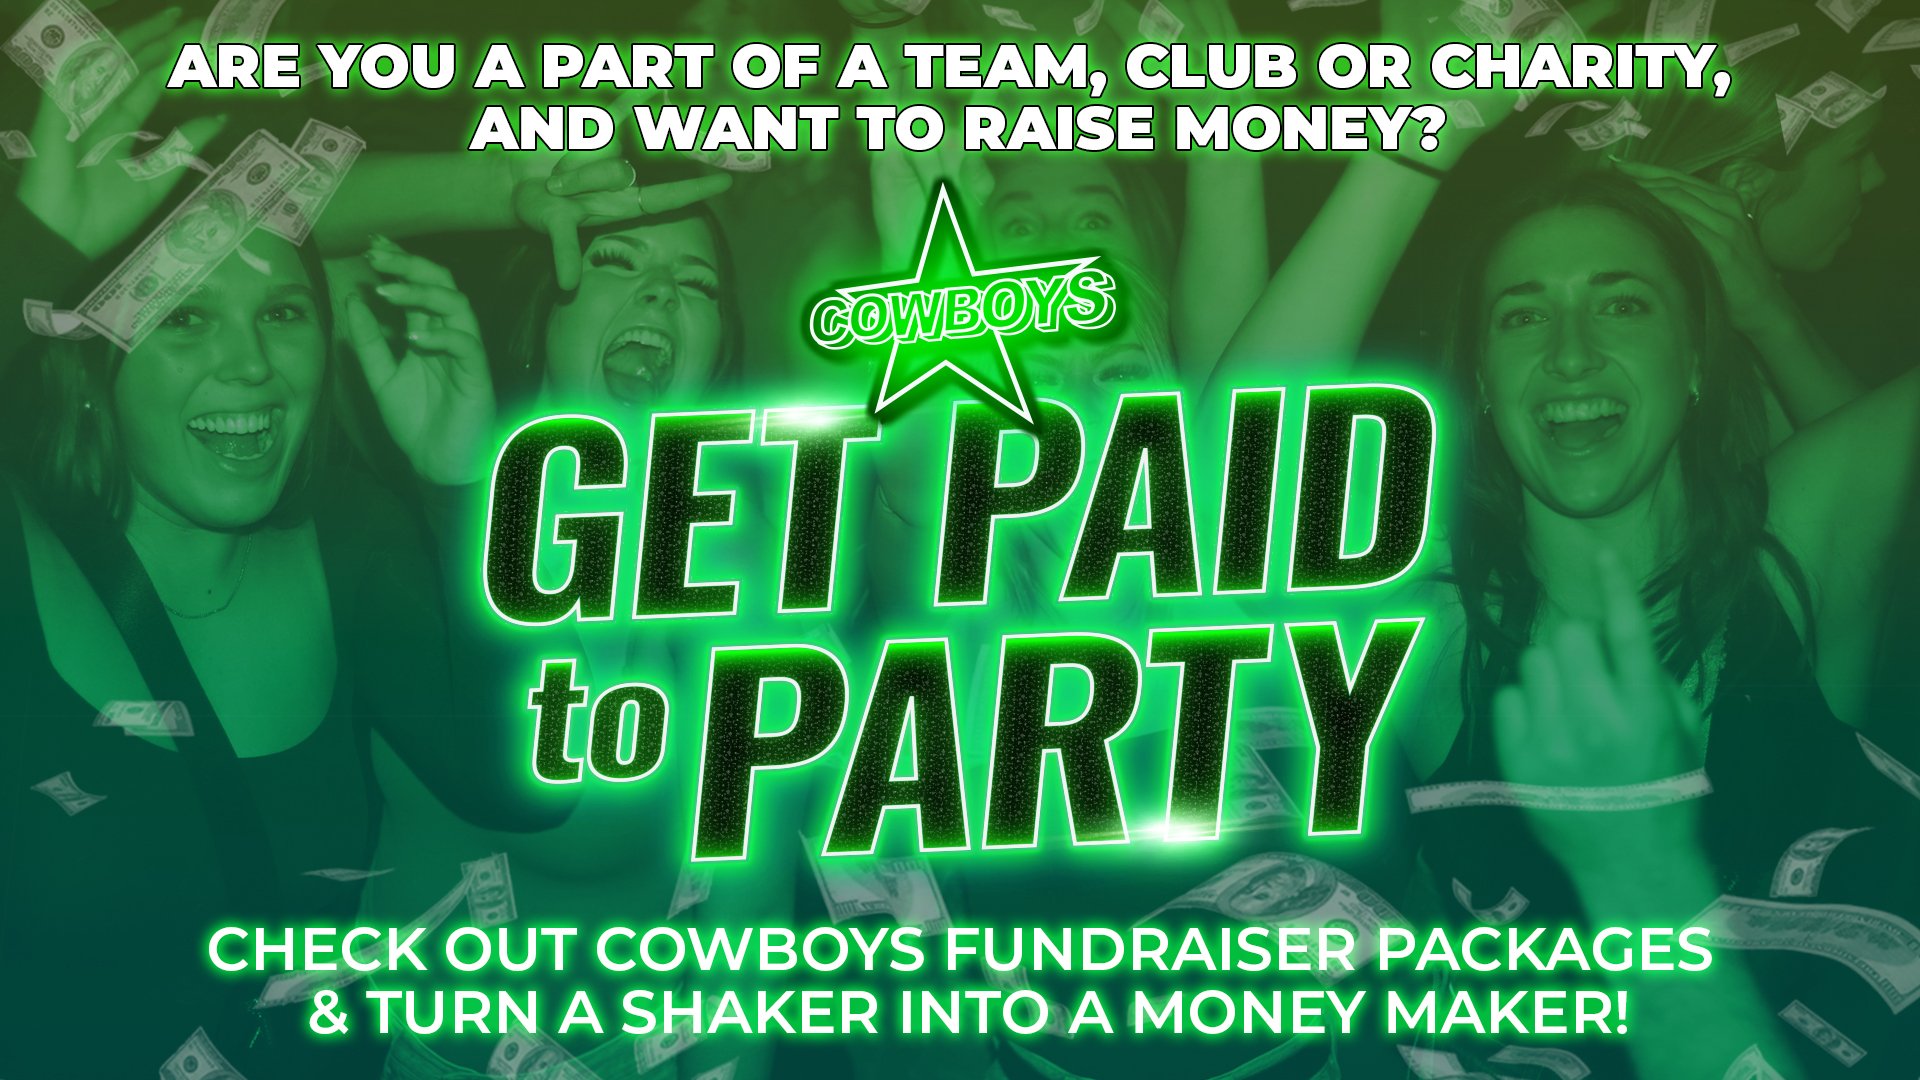 TVSLIDE-GET-PAID-TO-PARTY.jpg